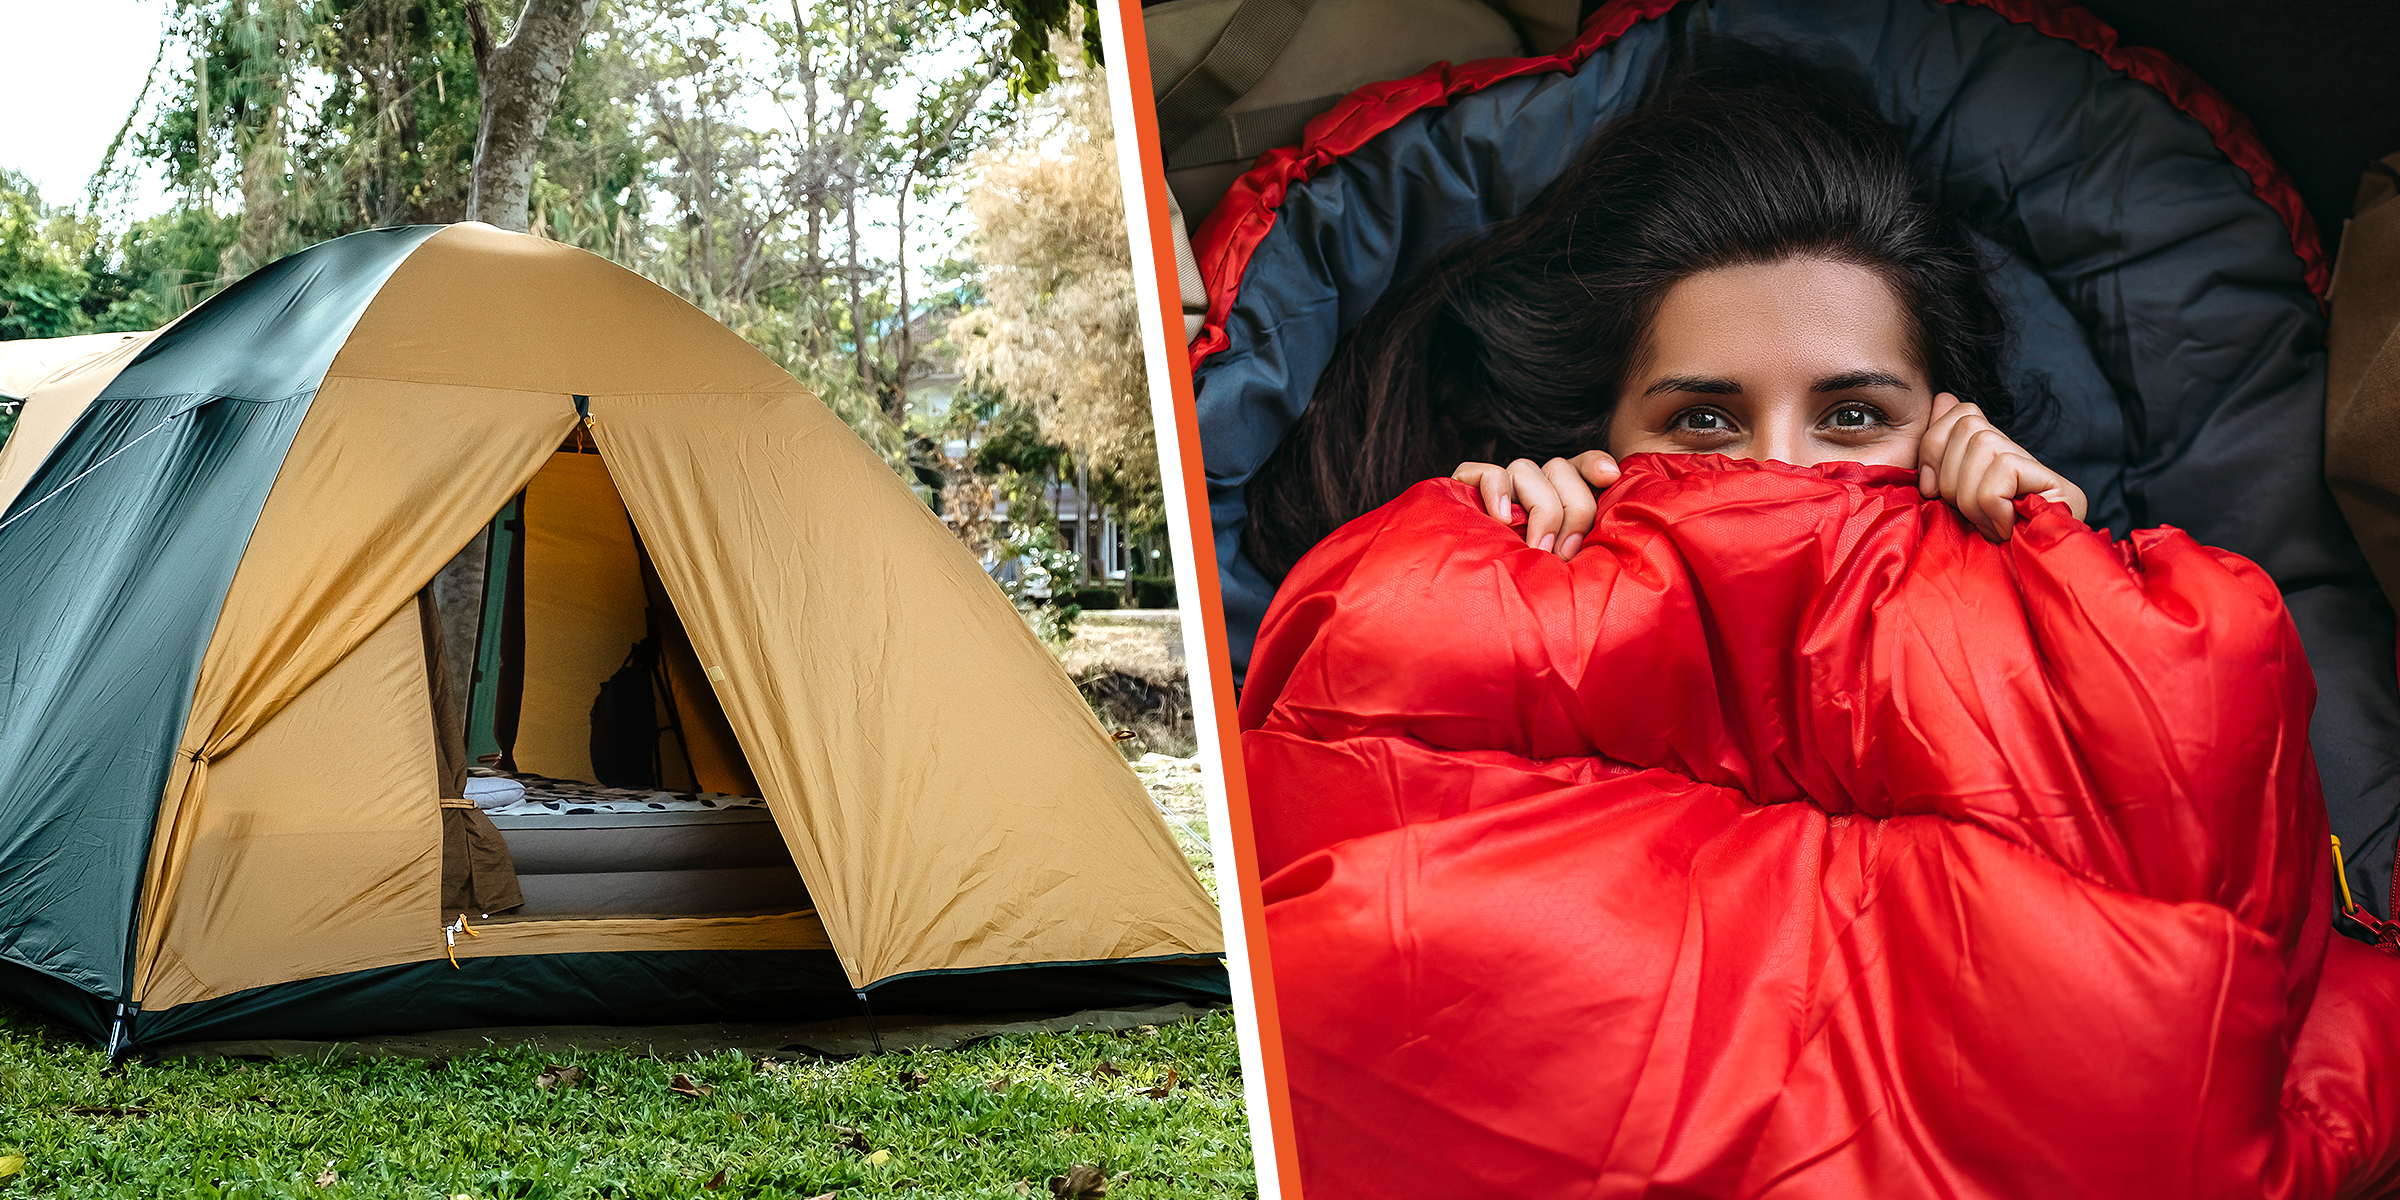 Camping tent | A person inside sleeping bag | Source: Shutterstock